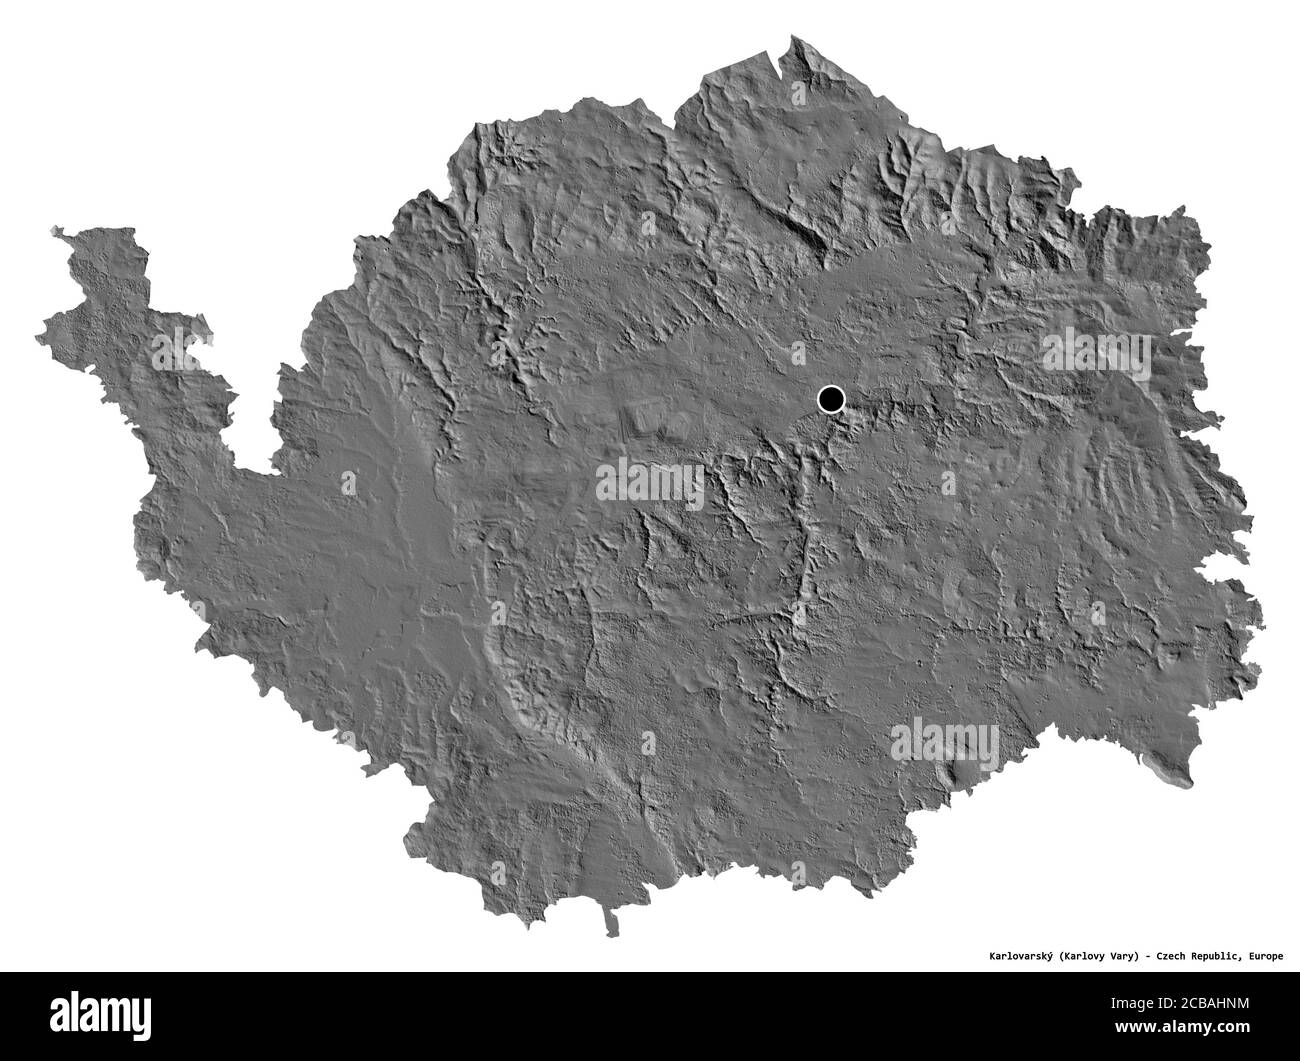 Shape of Karlovarský, region of Czech Republic, with its capital isolated on white background. Bilevel elevation map. 3D rendering Stock Photo